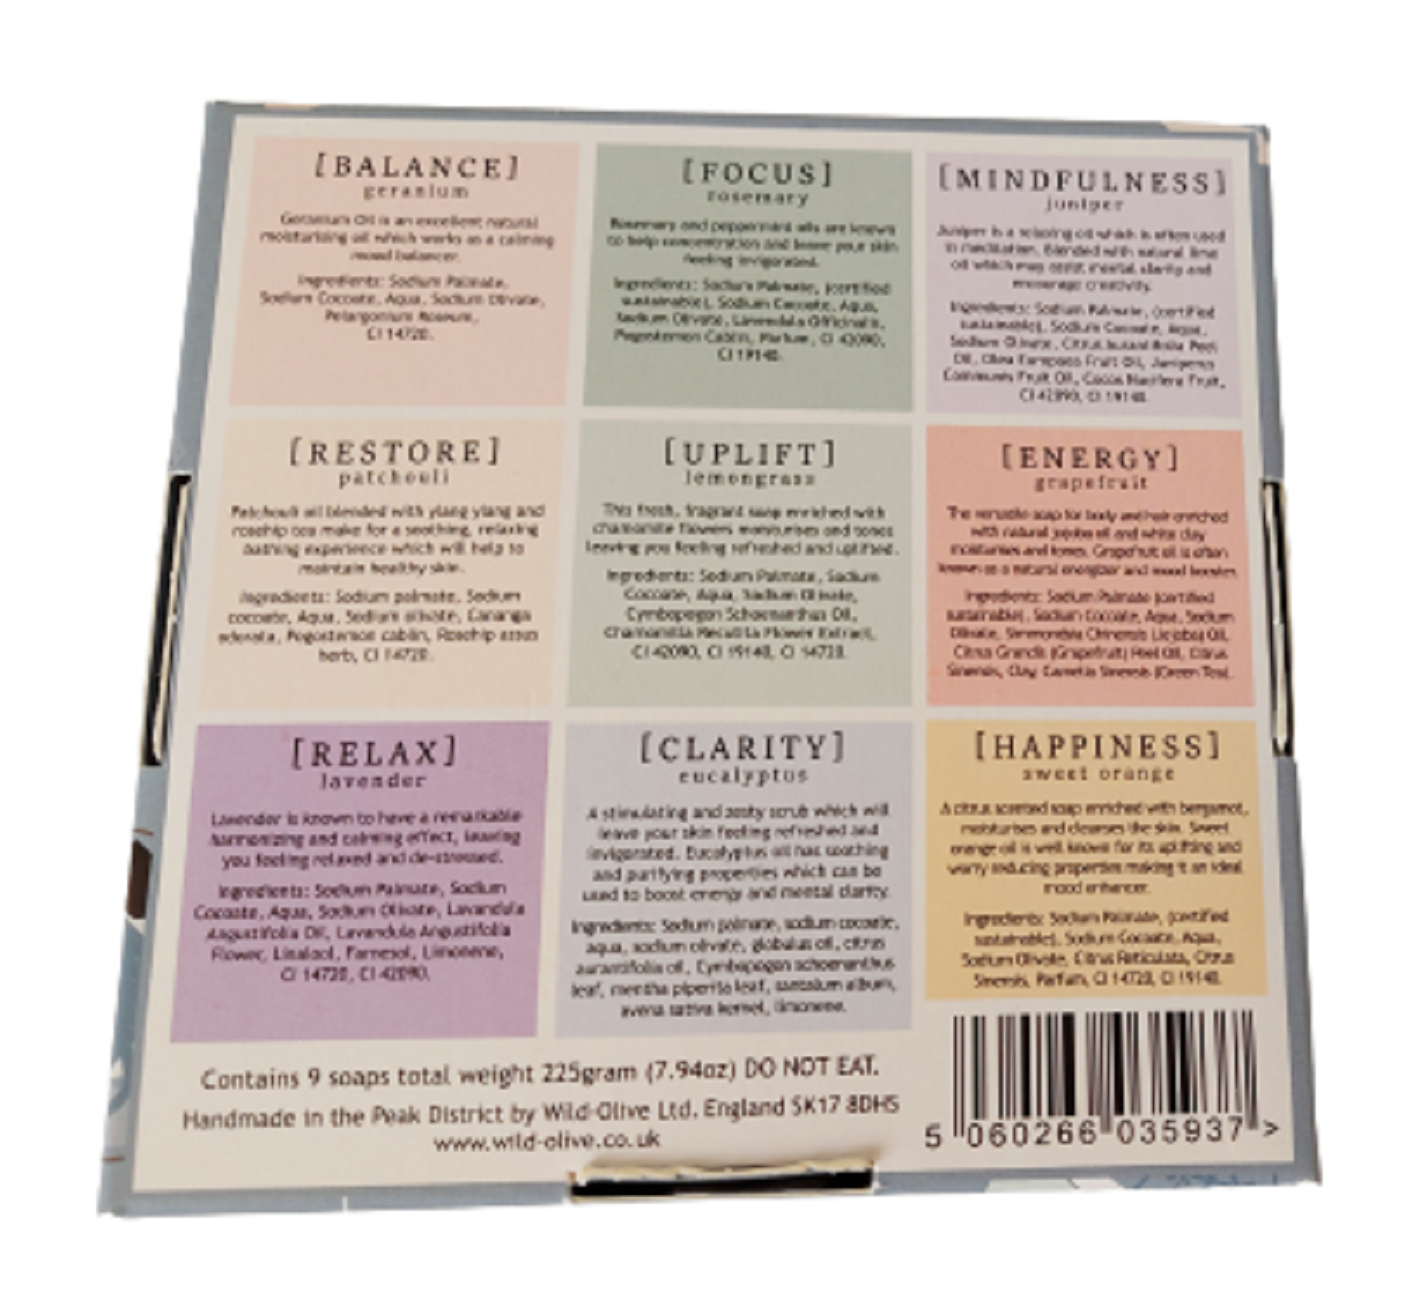 Wellbeing Natural Soap Collection - Set of 9